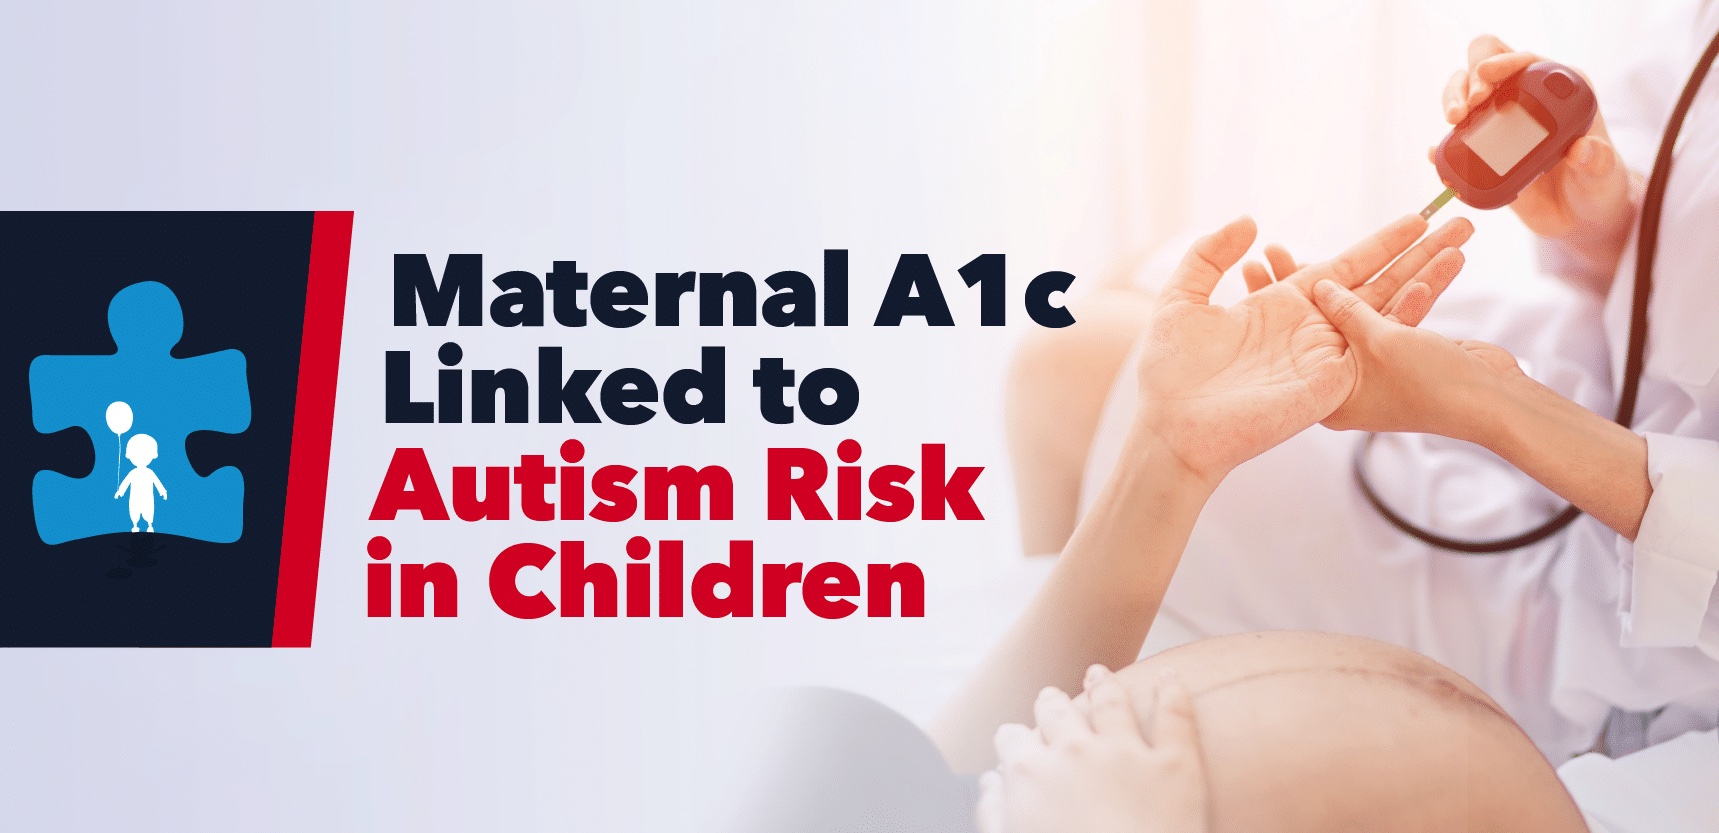 Maternal A1c Linked To Autism Risk In Children 01 Blog Copy